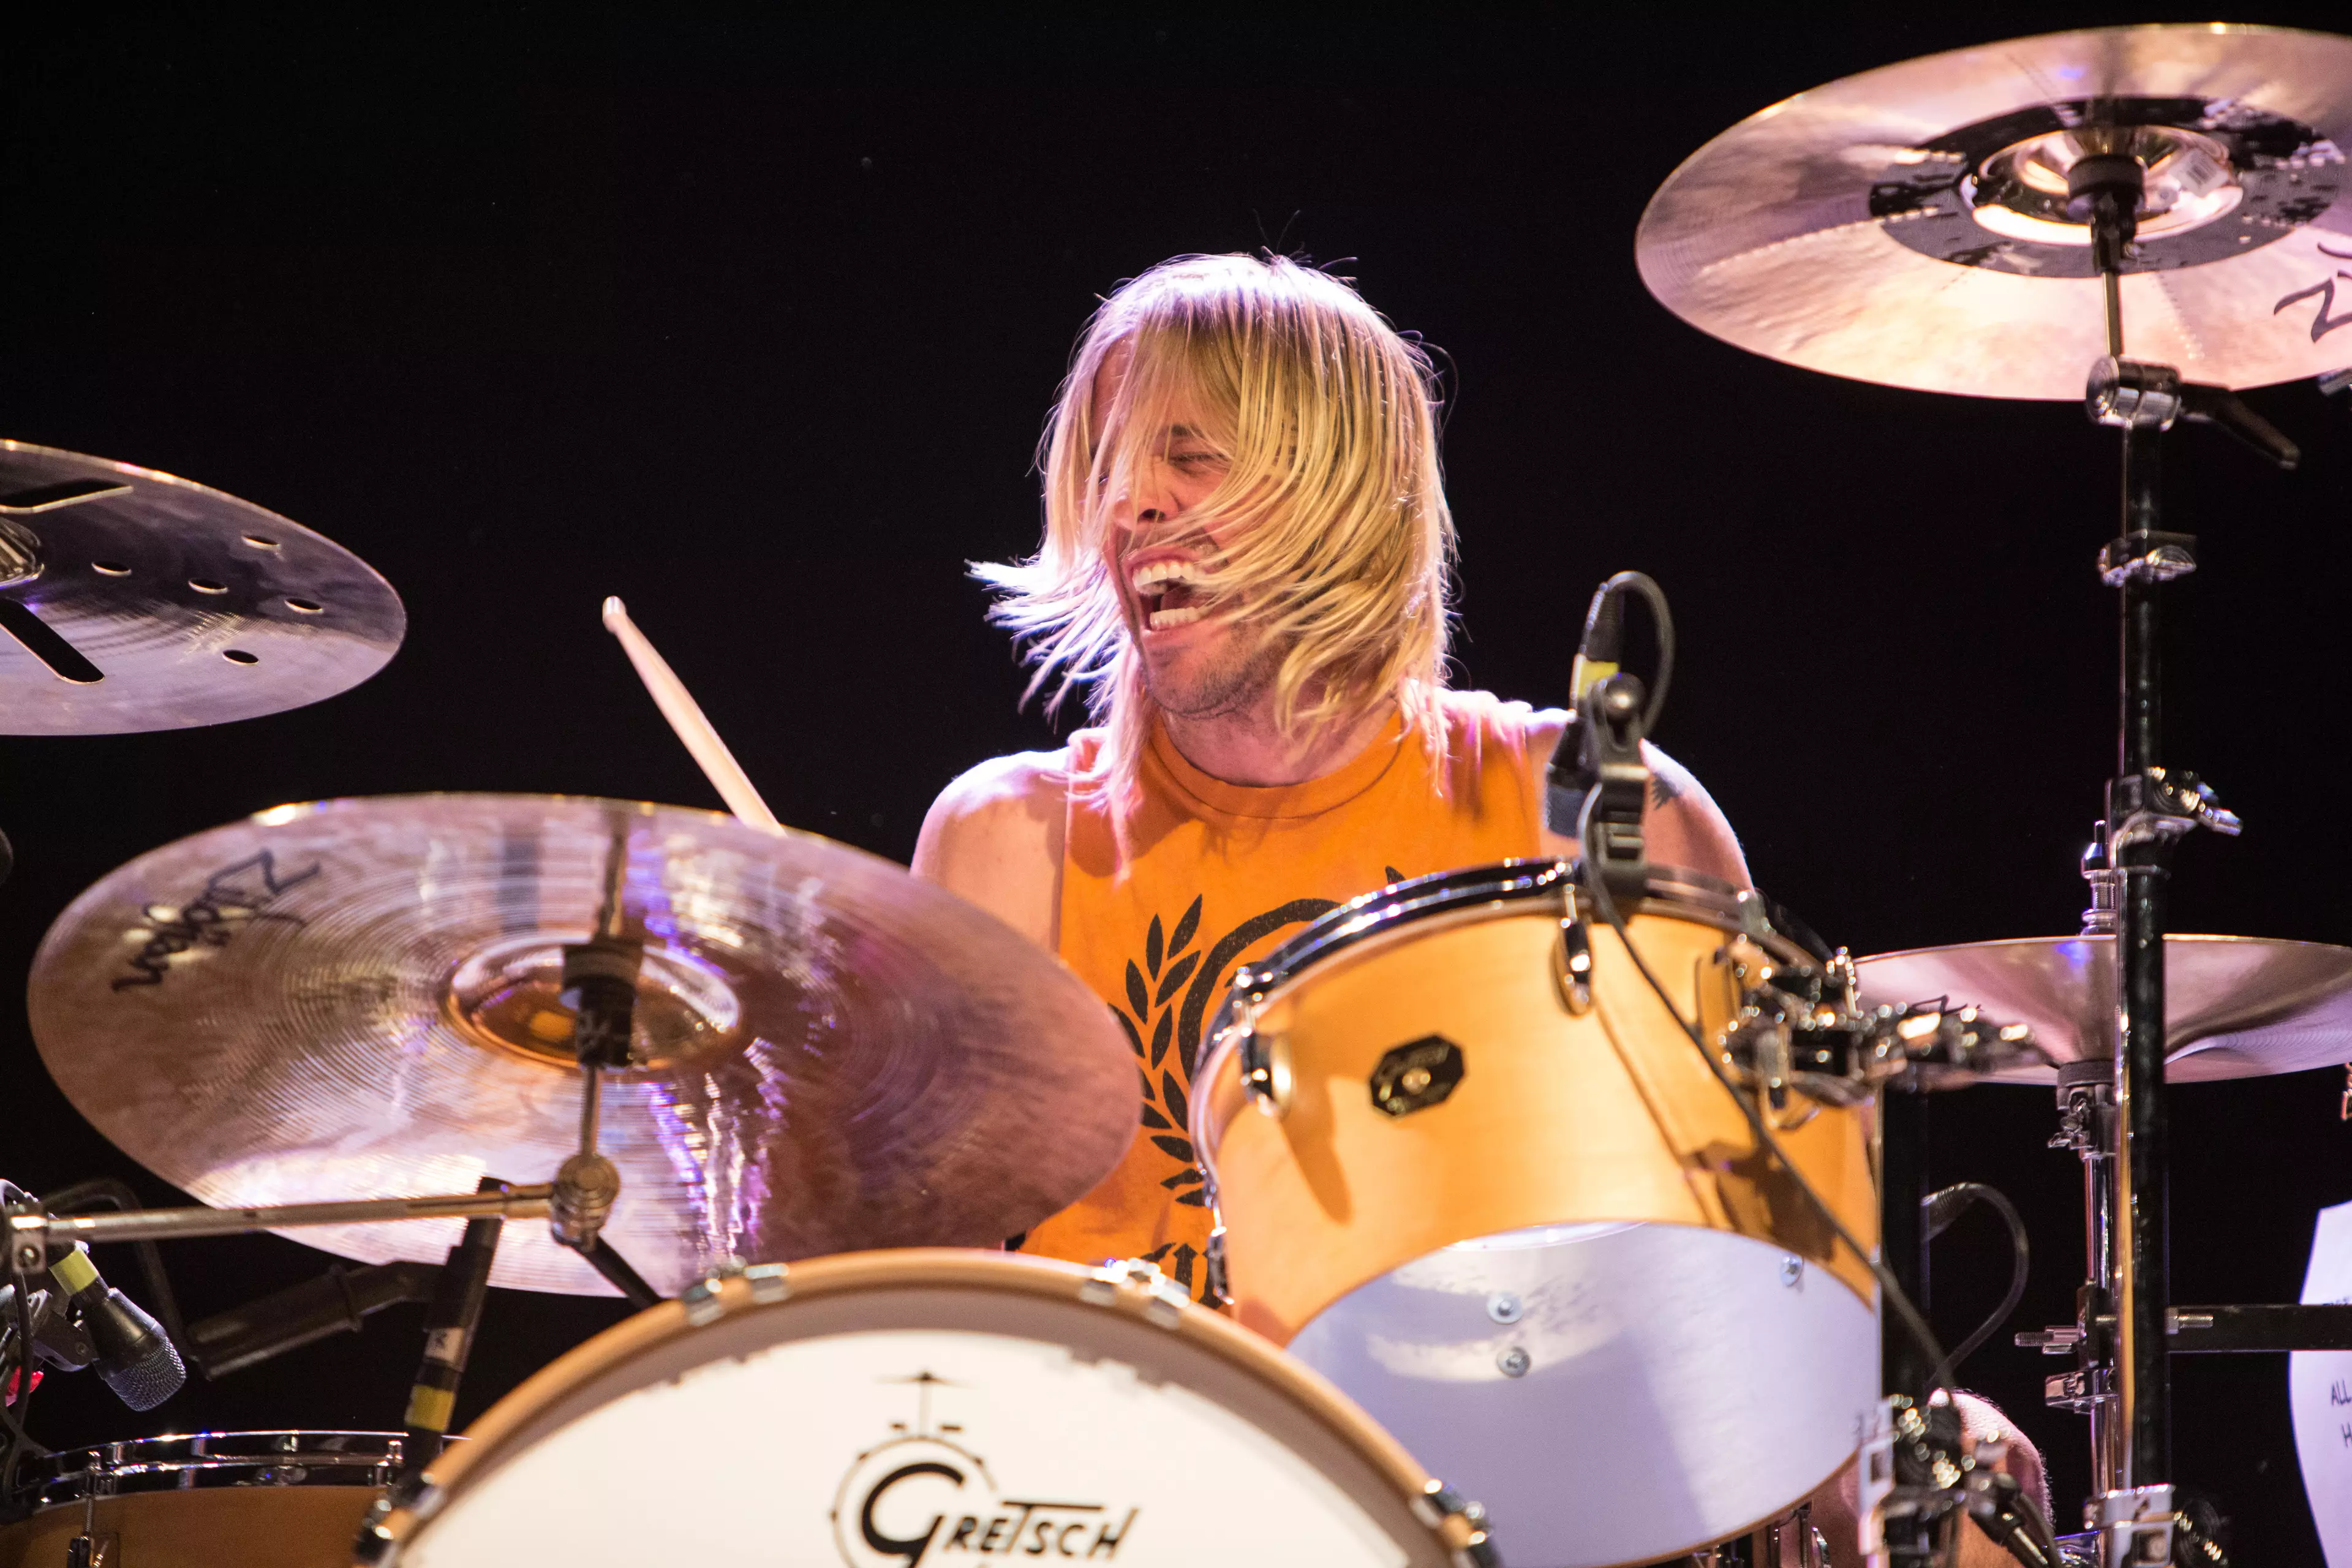 Taylor Hawkins joined the Foo Fighters in 1997.